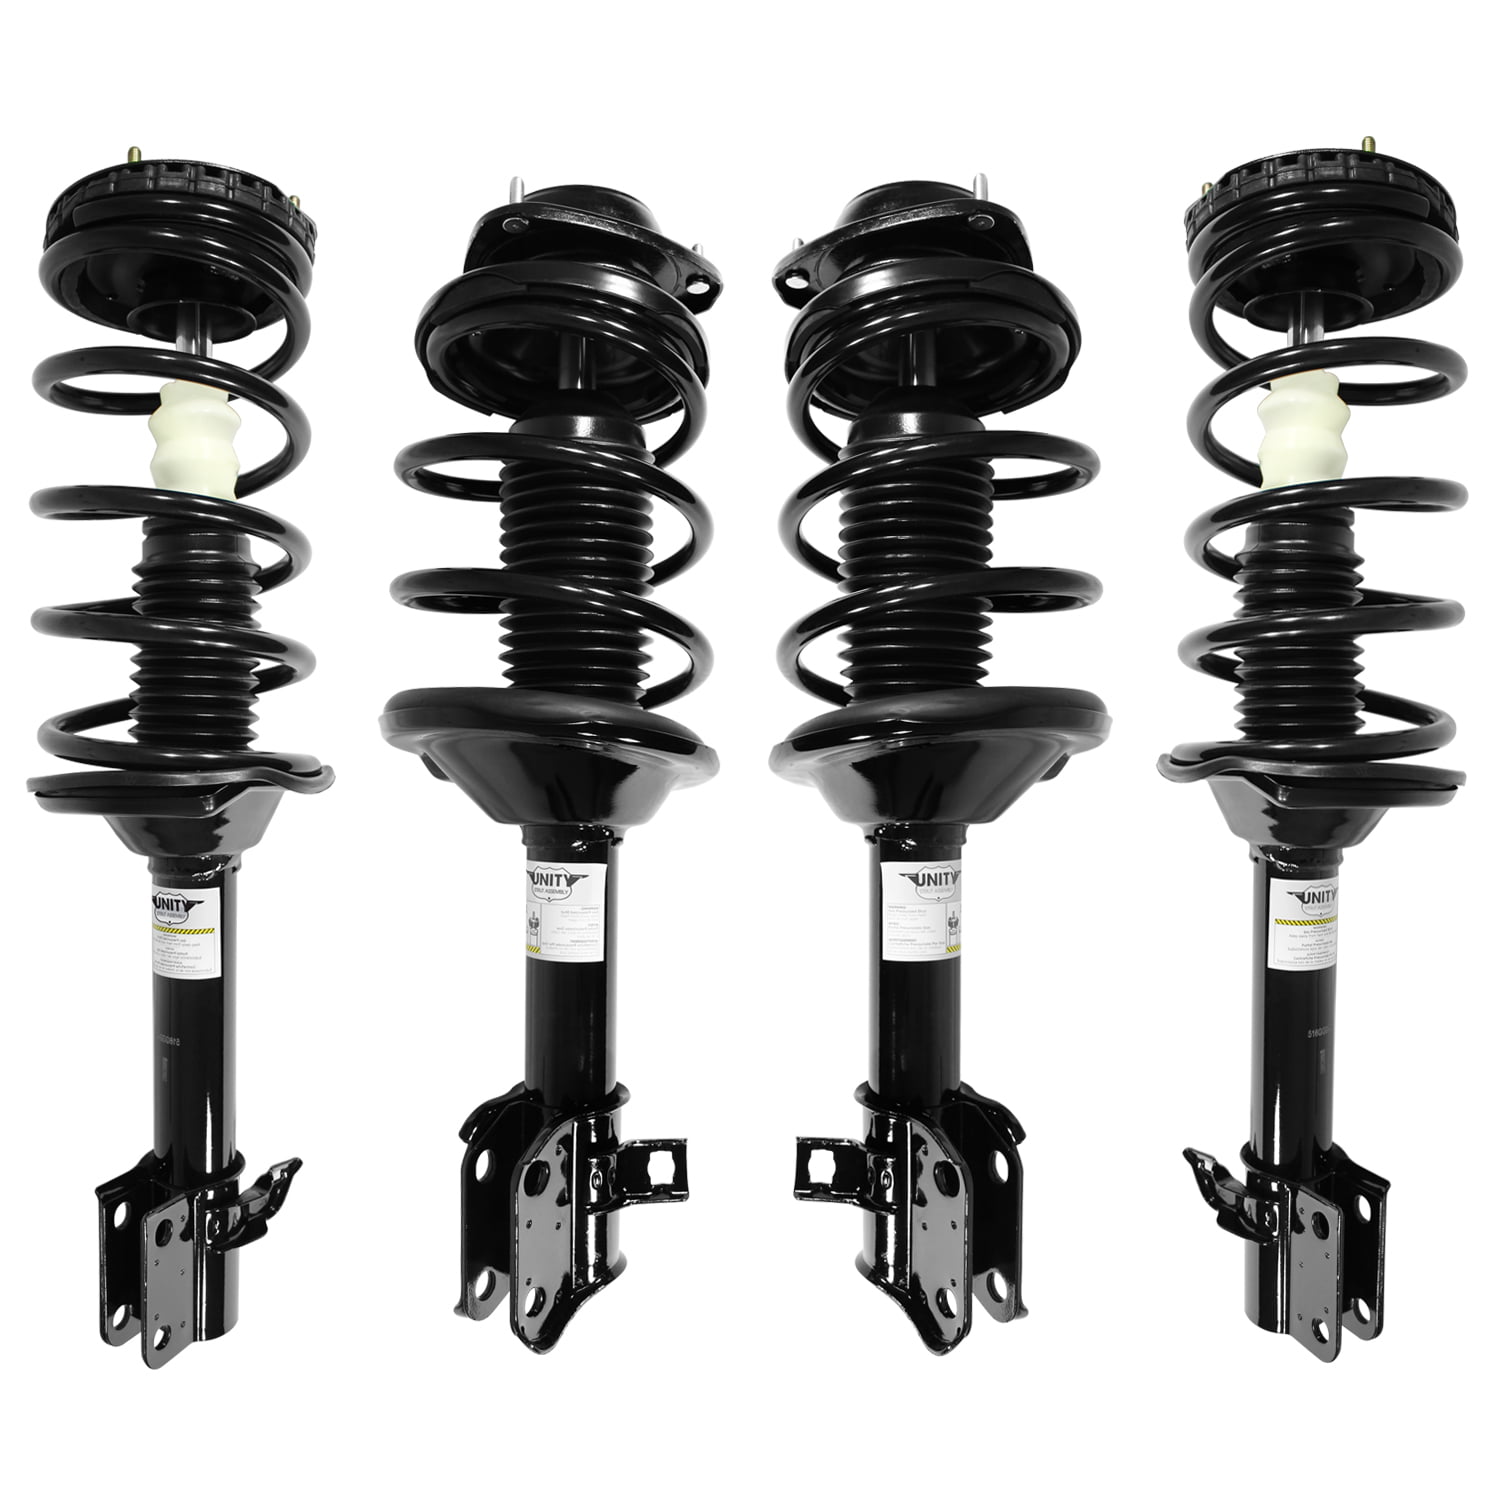 Rear Right Quick Complete Strut /& Spring Assembly for 1998-2002 Subaru Forester